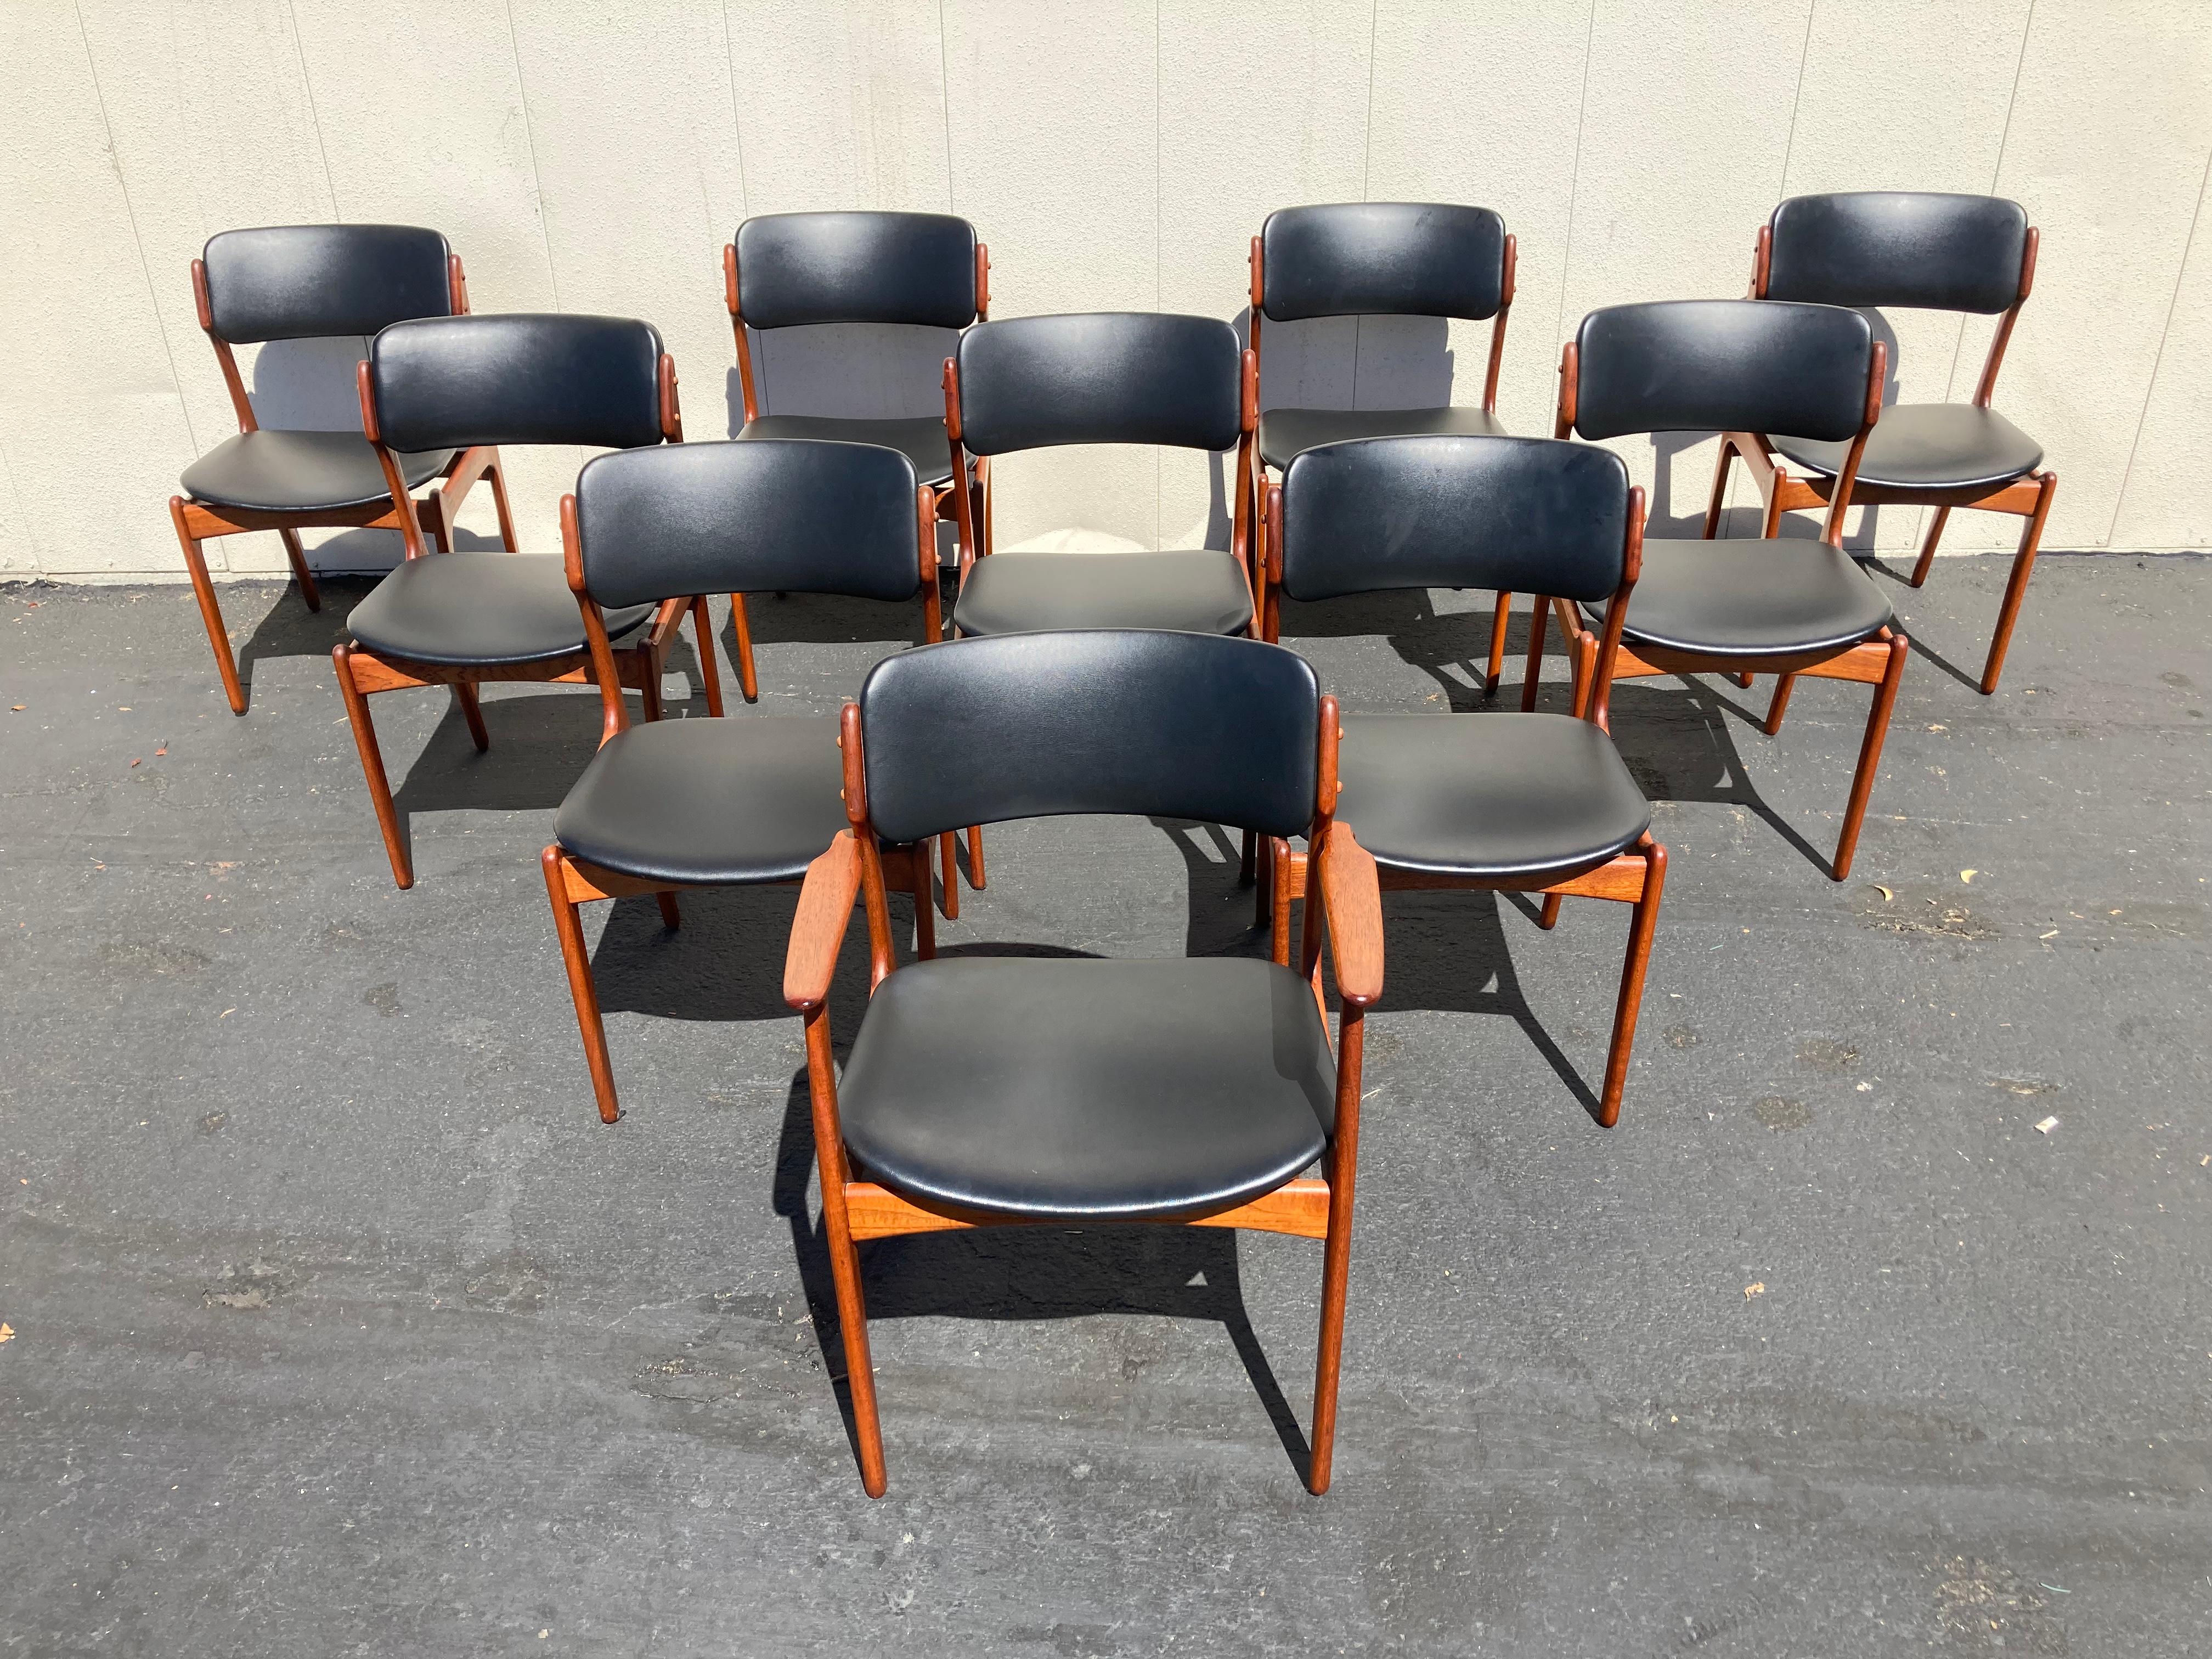 Set of 10 Danish mid century modern dining chairs designed by Erik Buch and made by Oddense Maskinsnedkeri in Denmark.  Classic Scandinavian design with sculpted details that is striking from all angles.  Molded floating seats and curved backs are